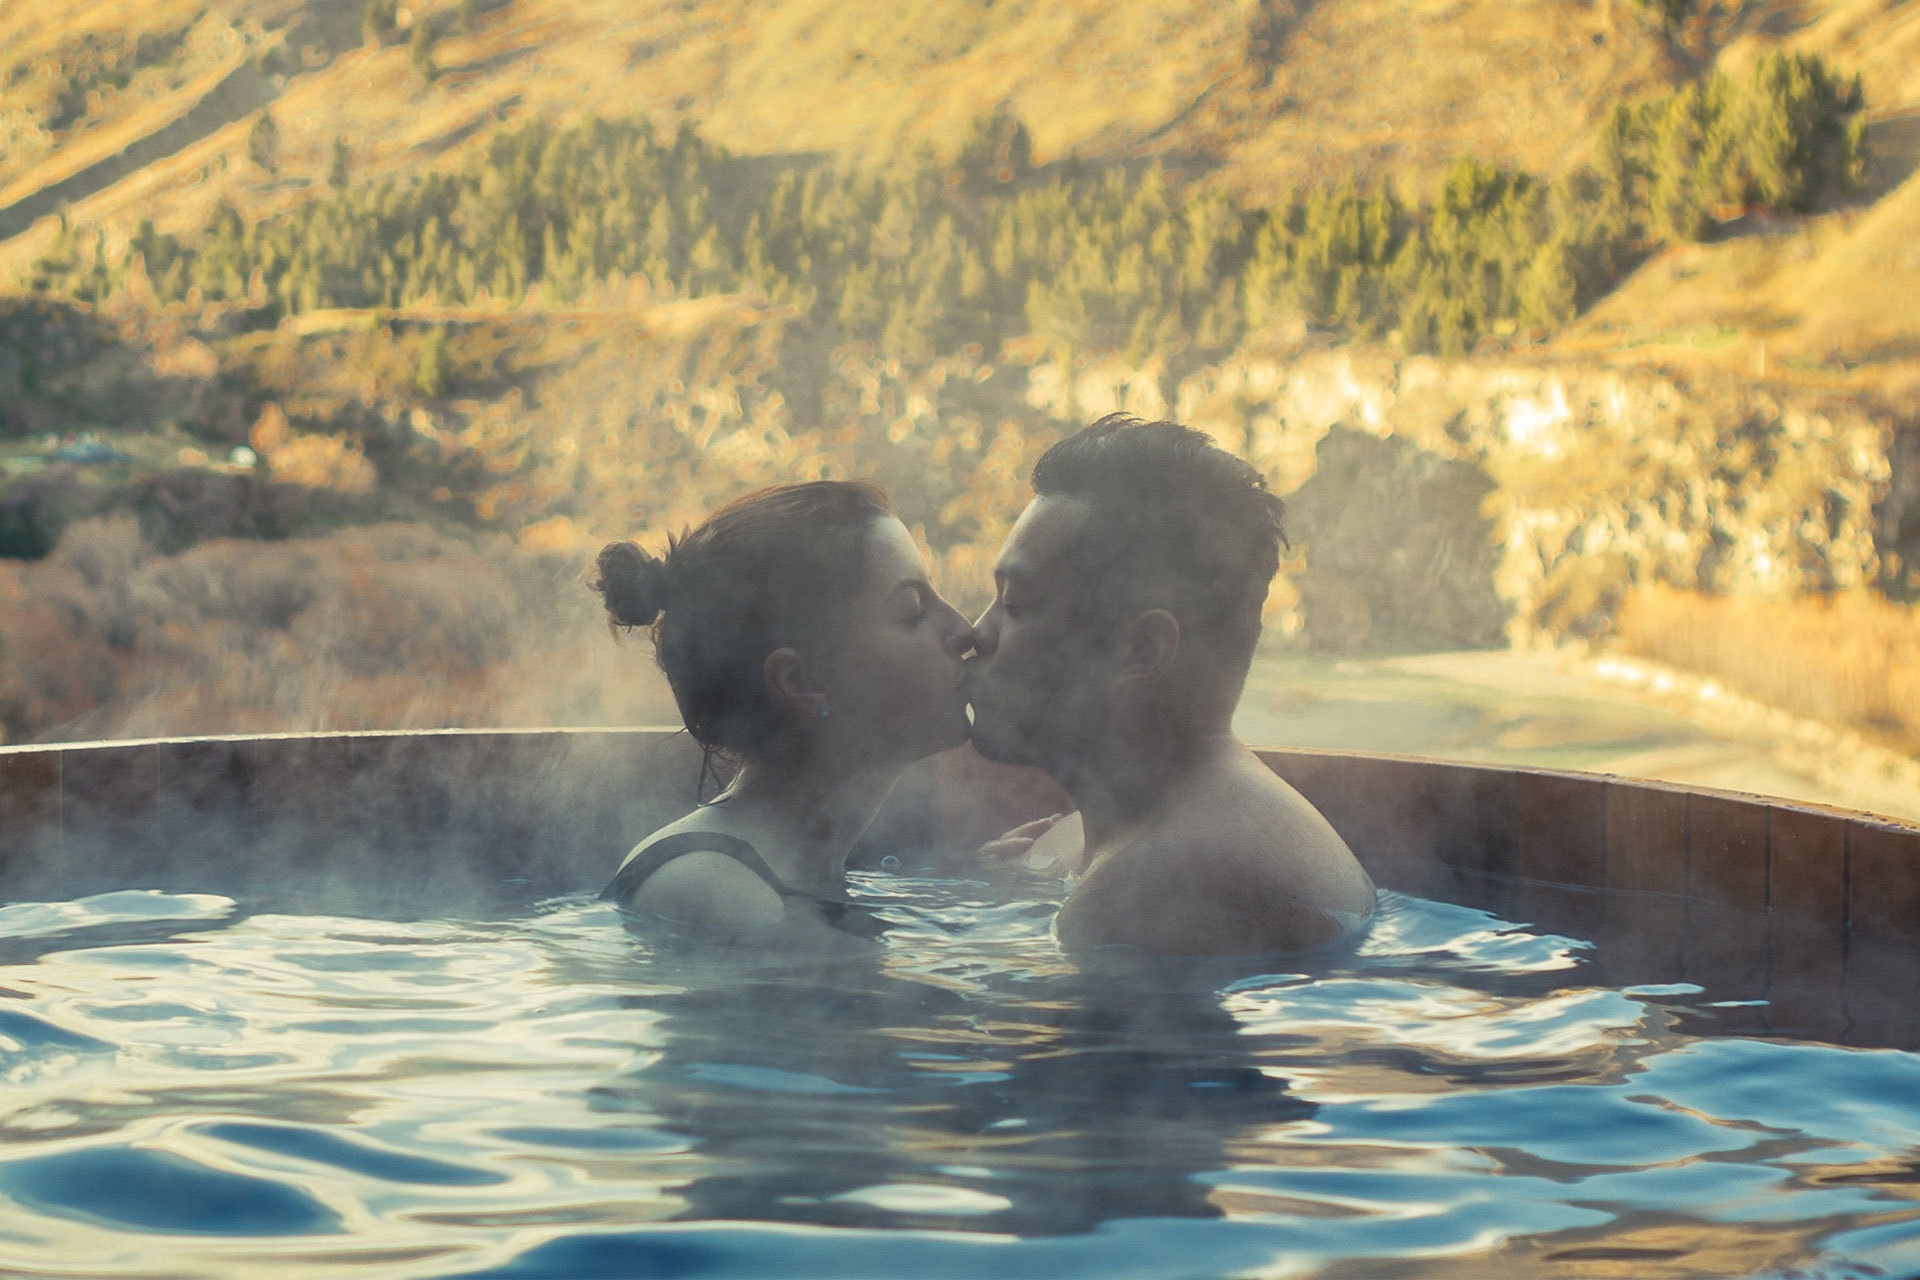 Find Holiday Lodges, Log Cabins and Cottages with Hot Tubs for the Perfect Hot Tub Getaway